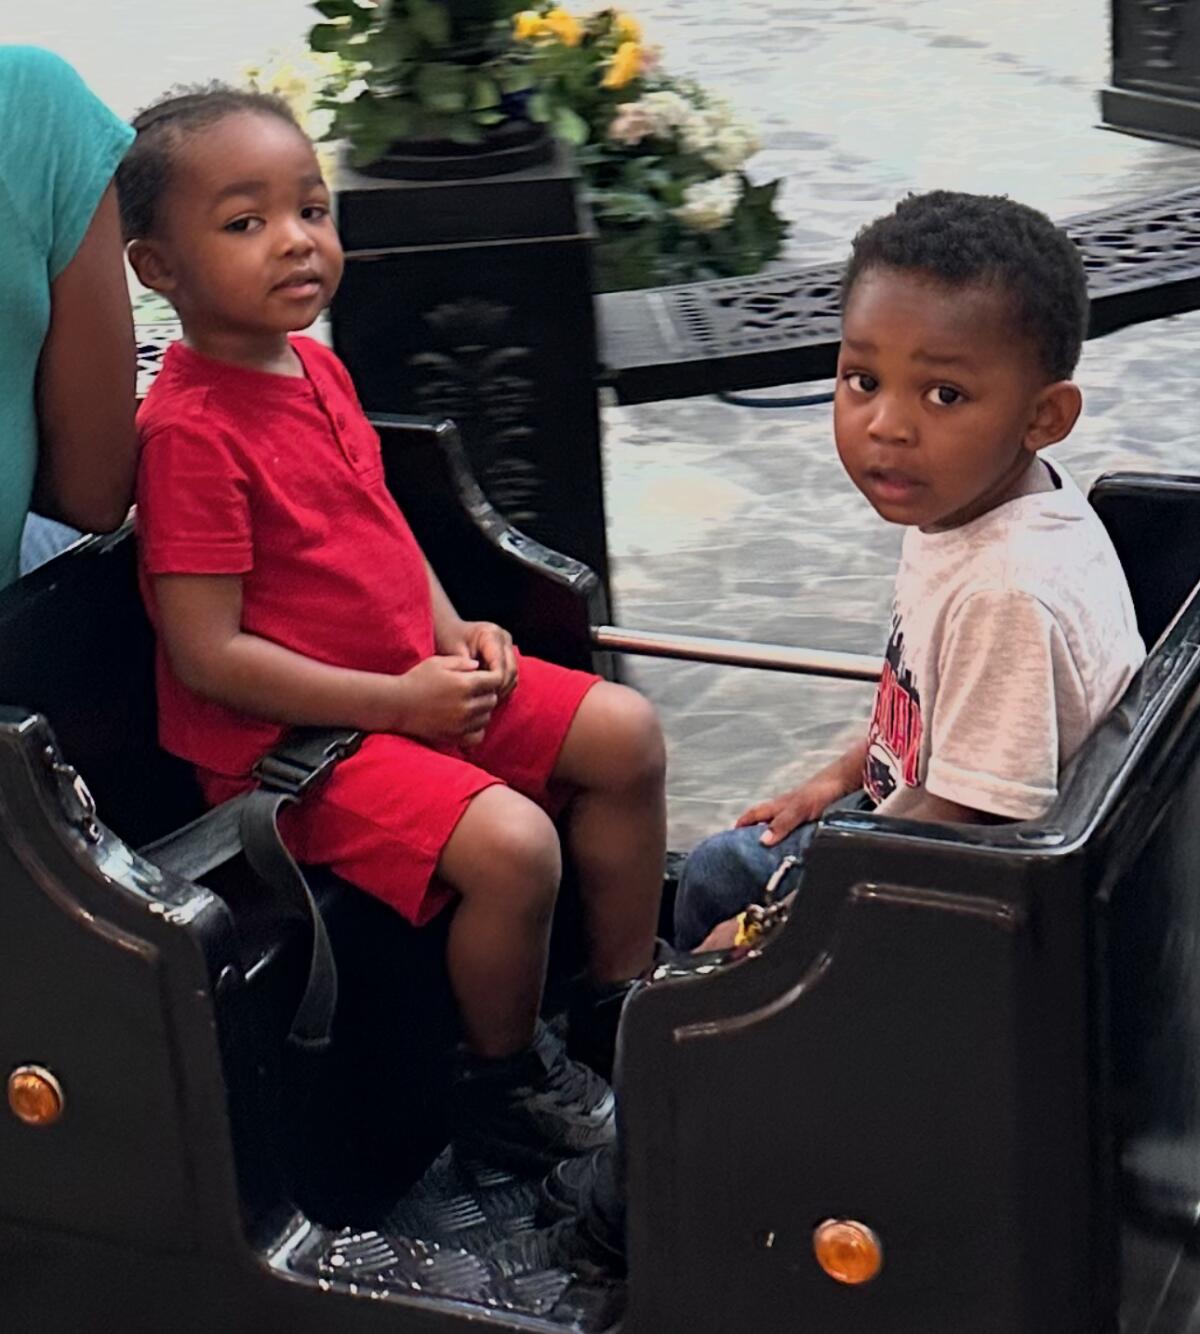 A boy in a red shirt and shorts, left, sits across from another boy in a white shirt on a ride at the mall.